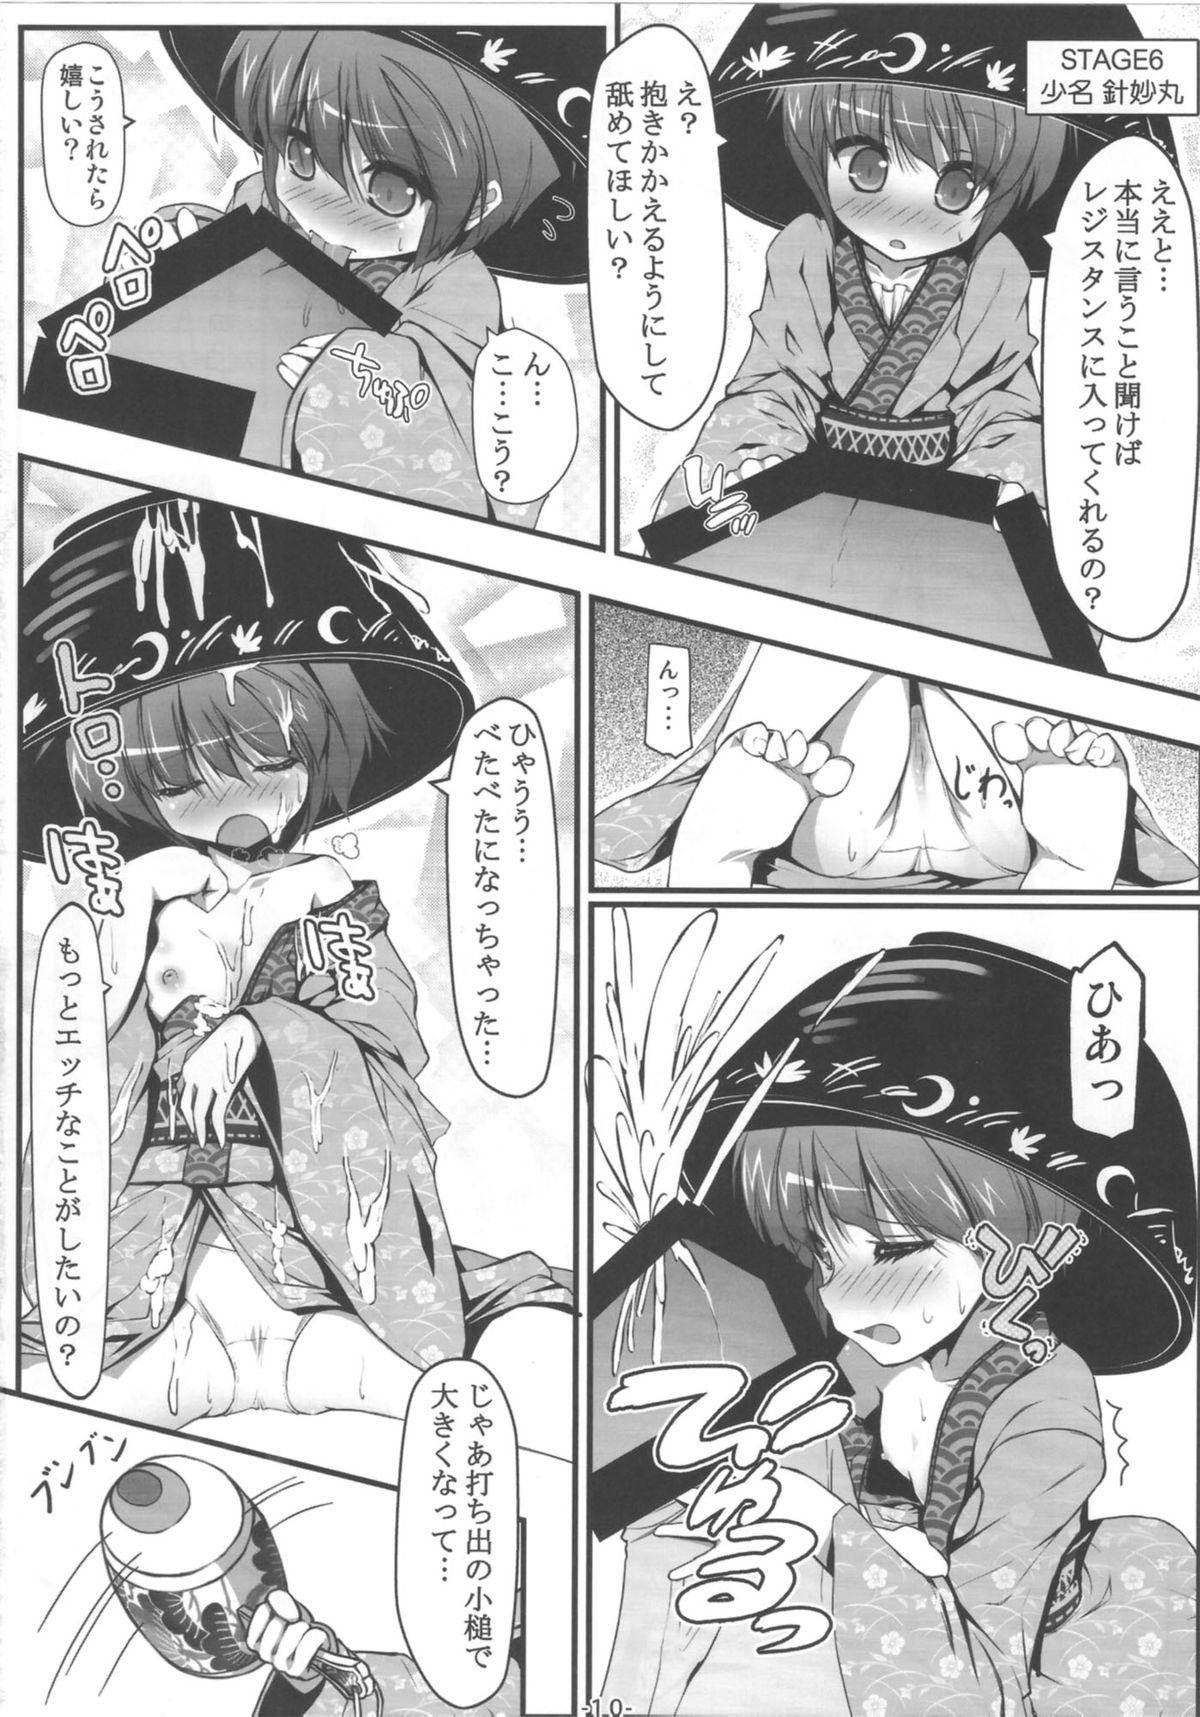 Leite Ookikuna ~ Re!? - Touhou project Food - Page 11